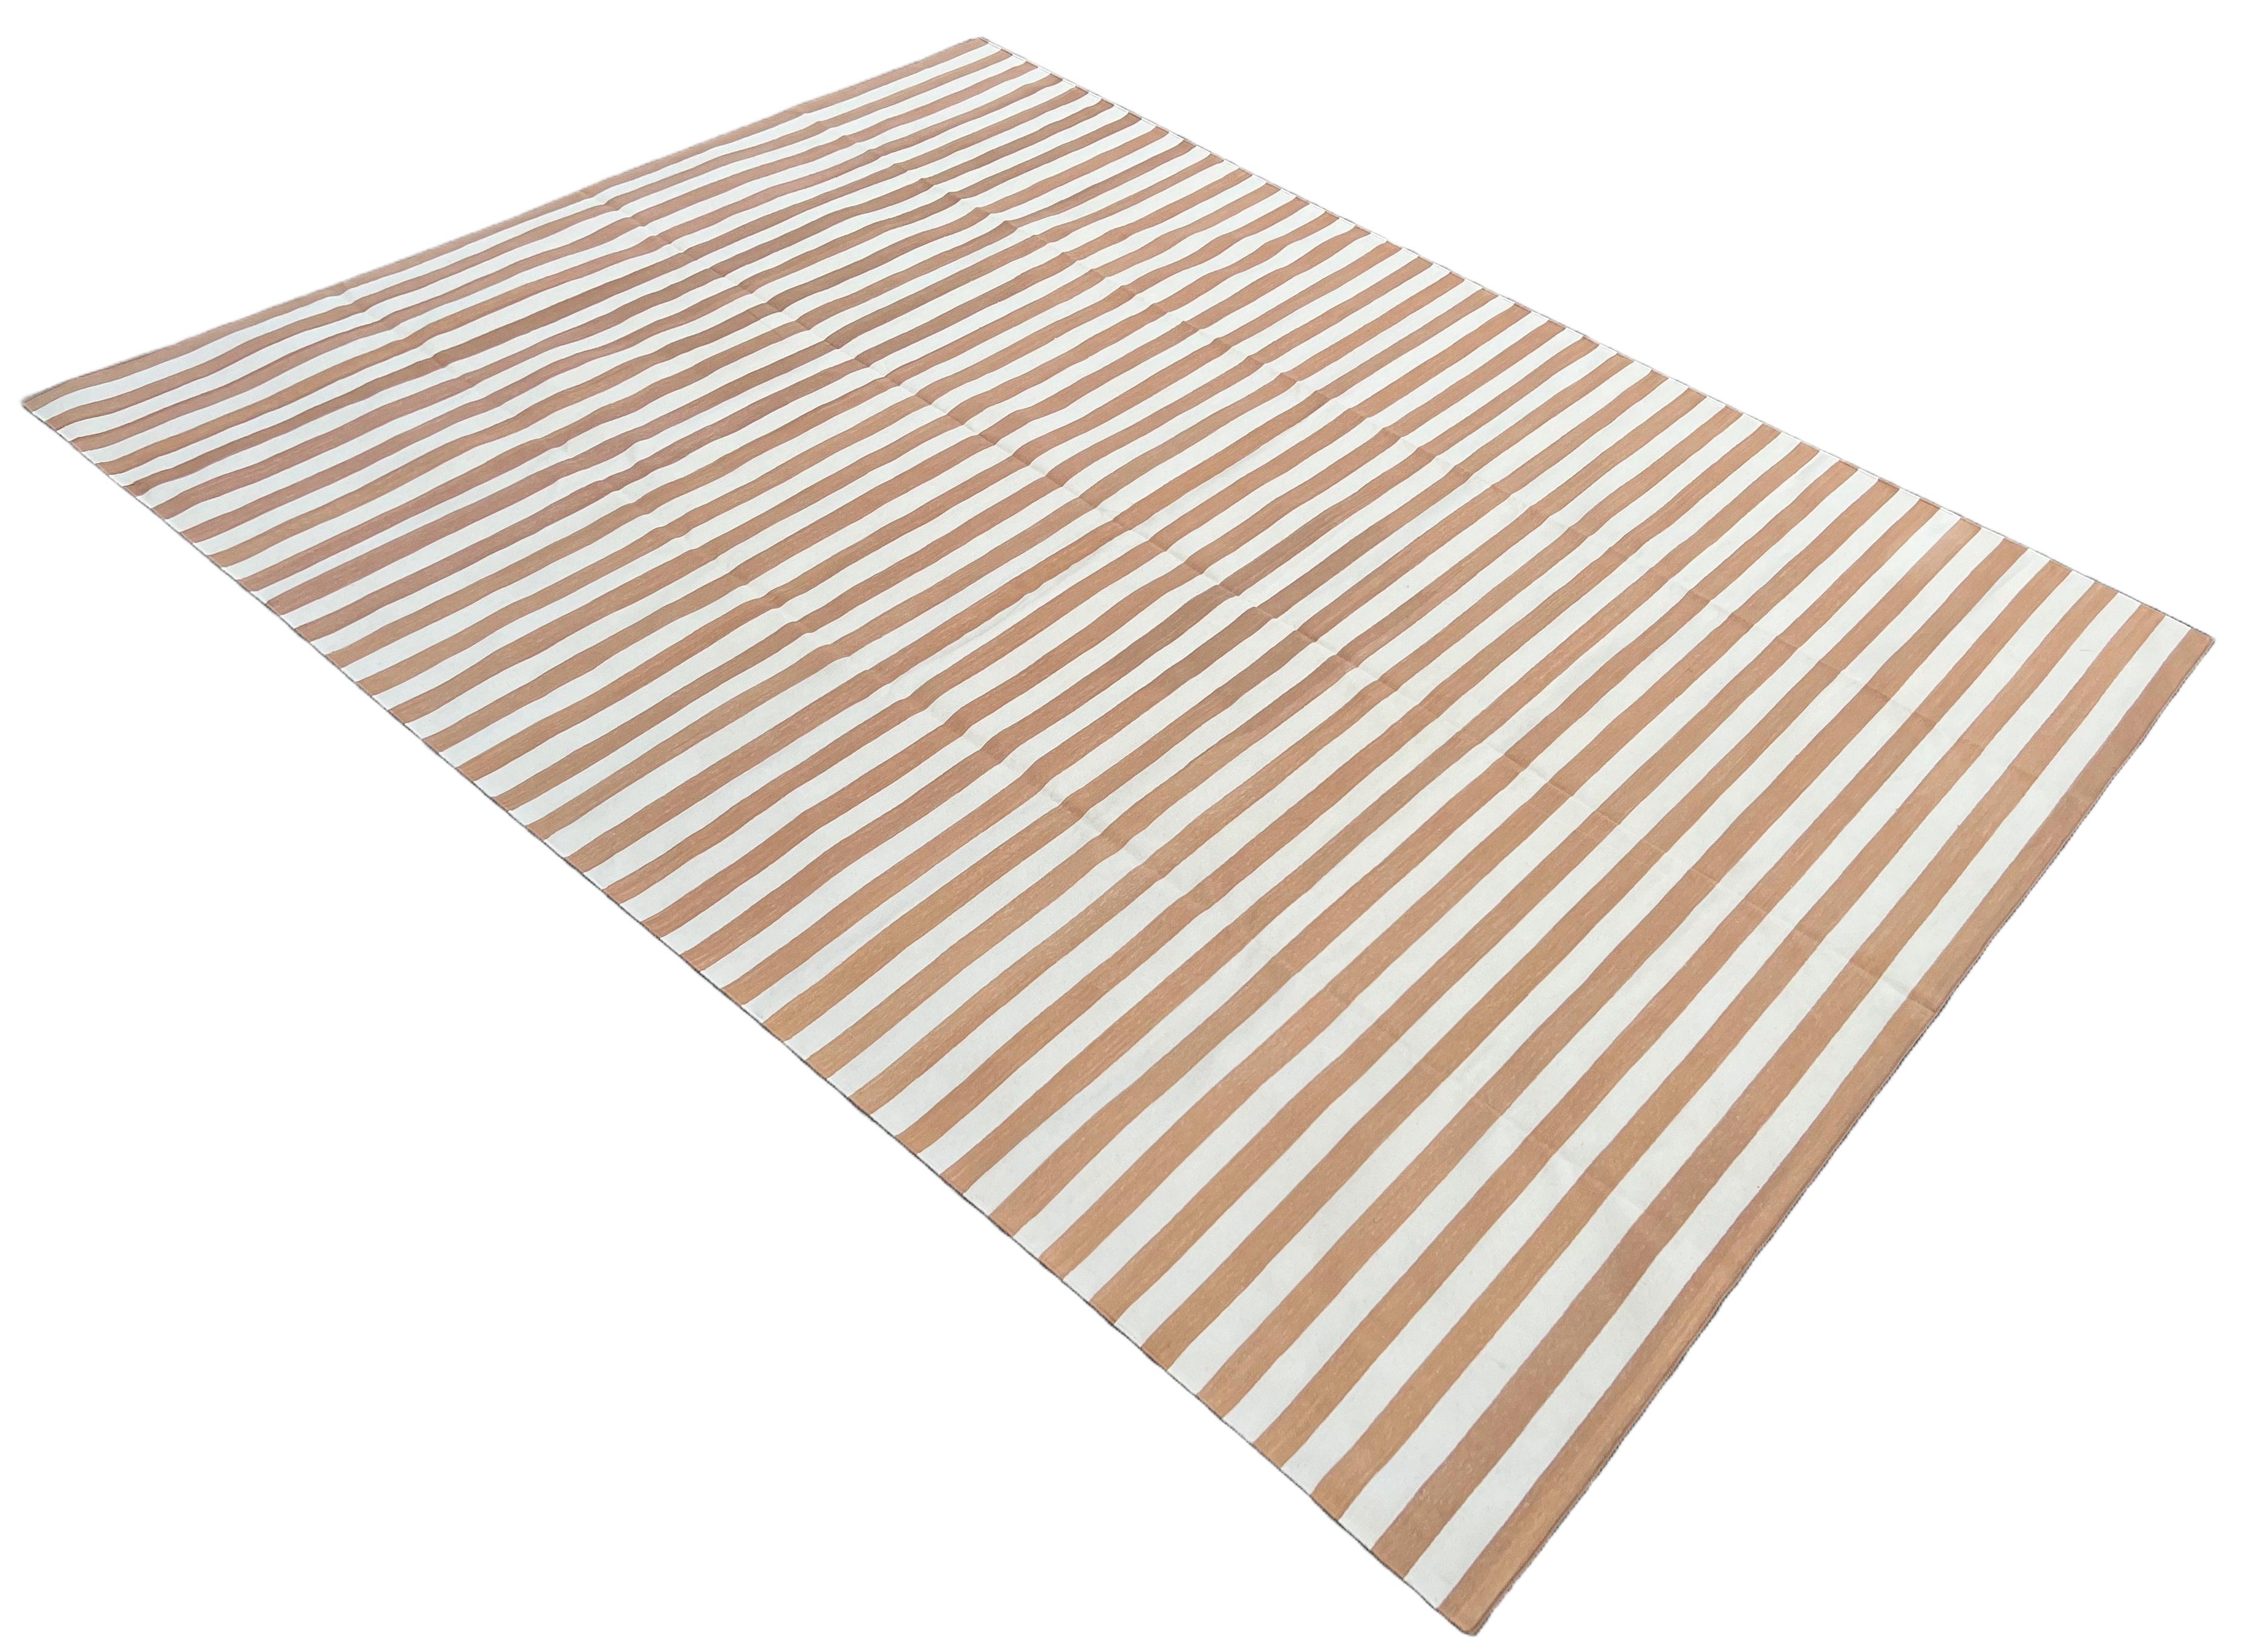 Handmade Cotton Area Flat Weave Rug, 9x12 Tan And White Striped Indian Dhurrie For Sale 3